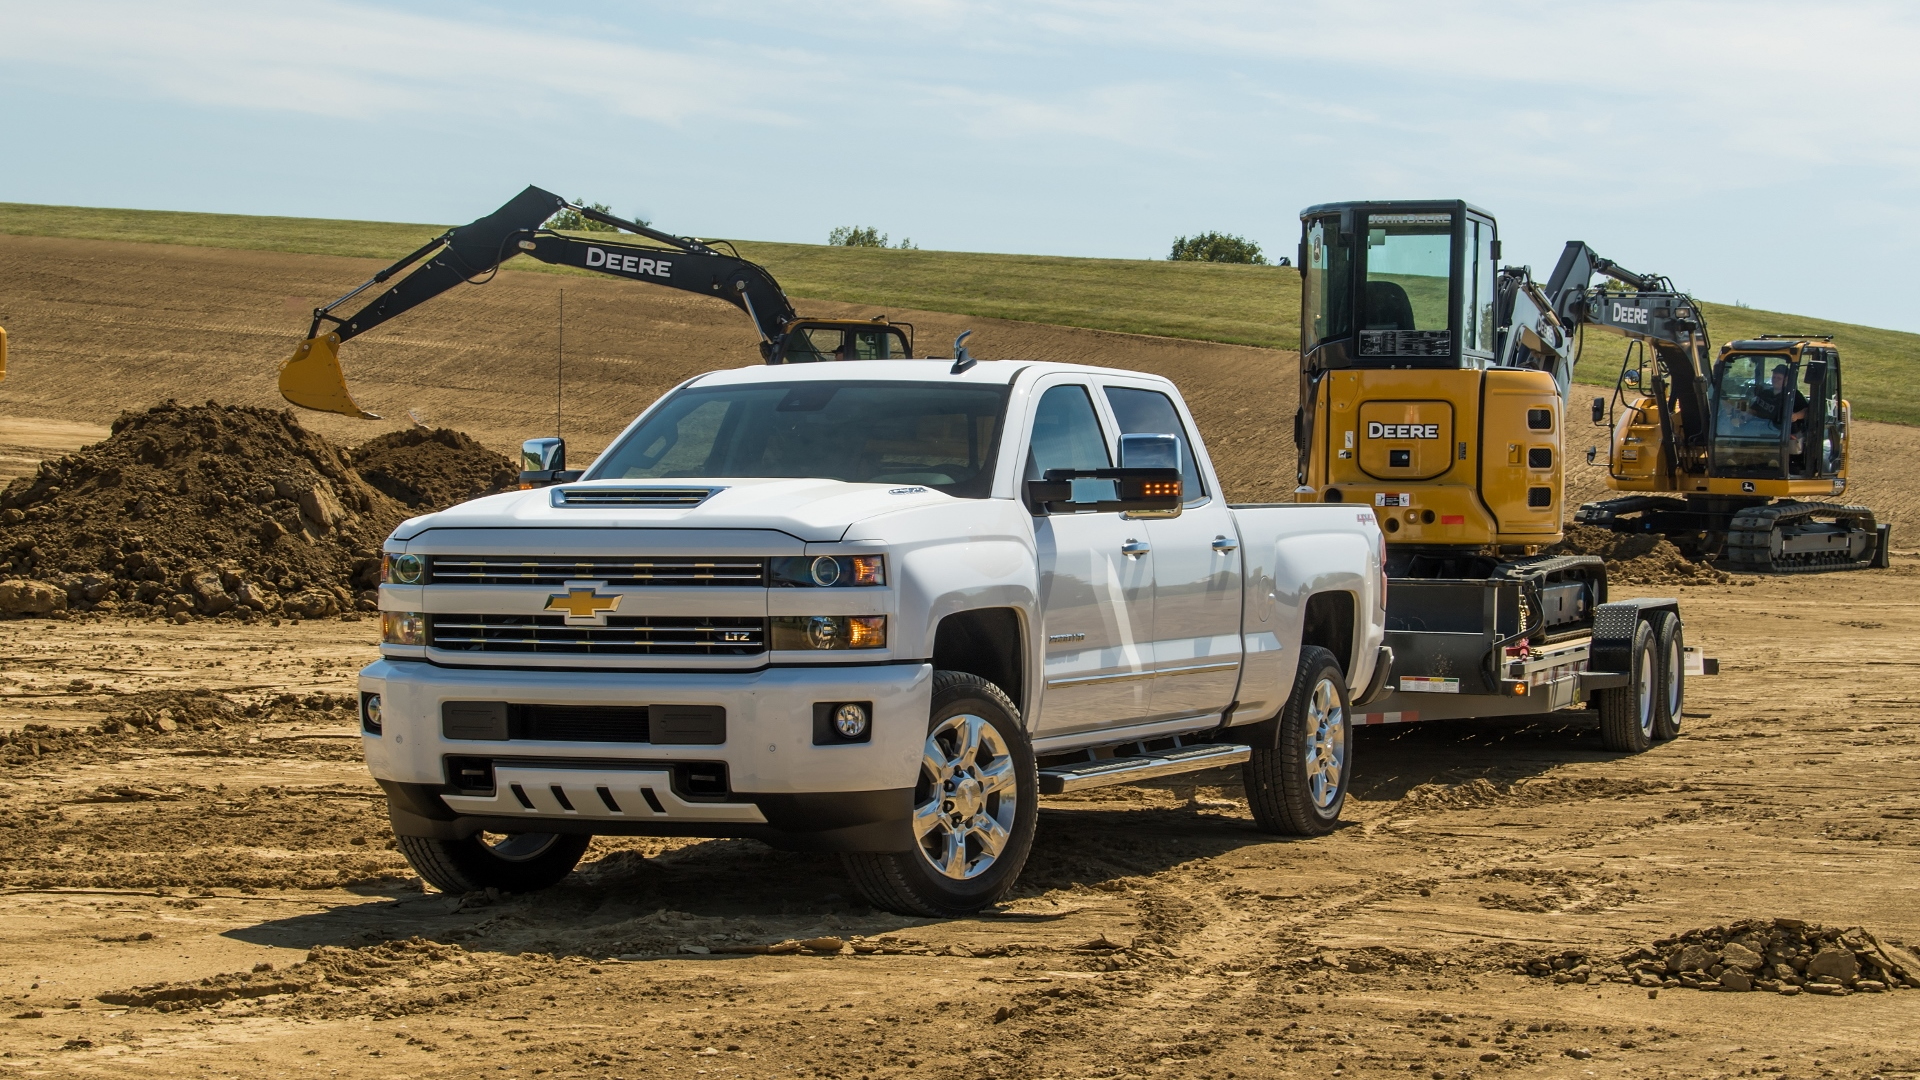 2017 Chevrolet Silverado Hd First Drive Review Playing With John Deere Equipment In The Adult Sandbox